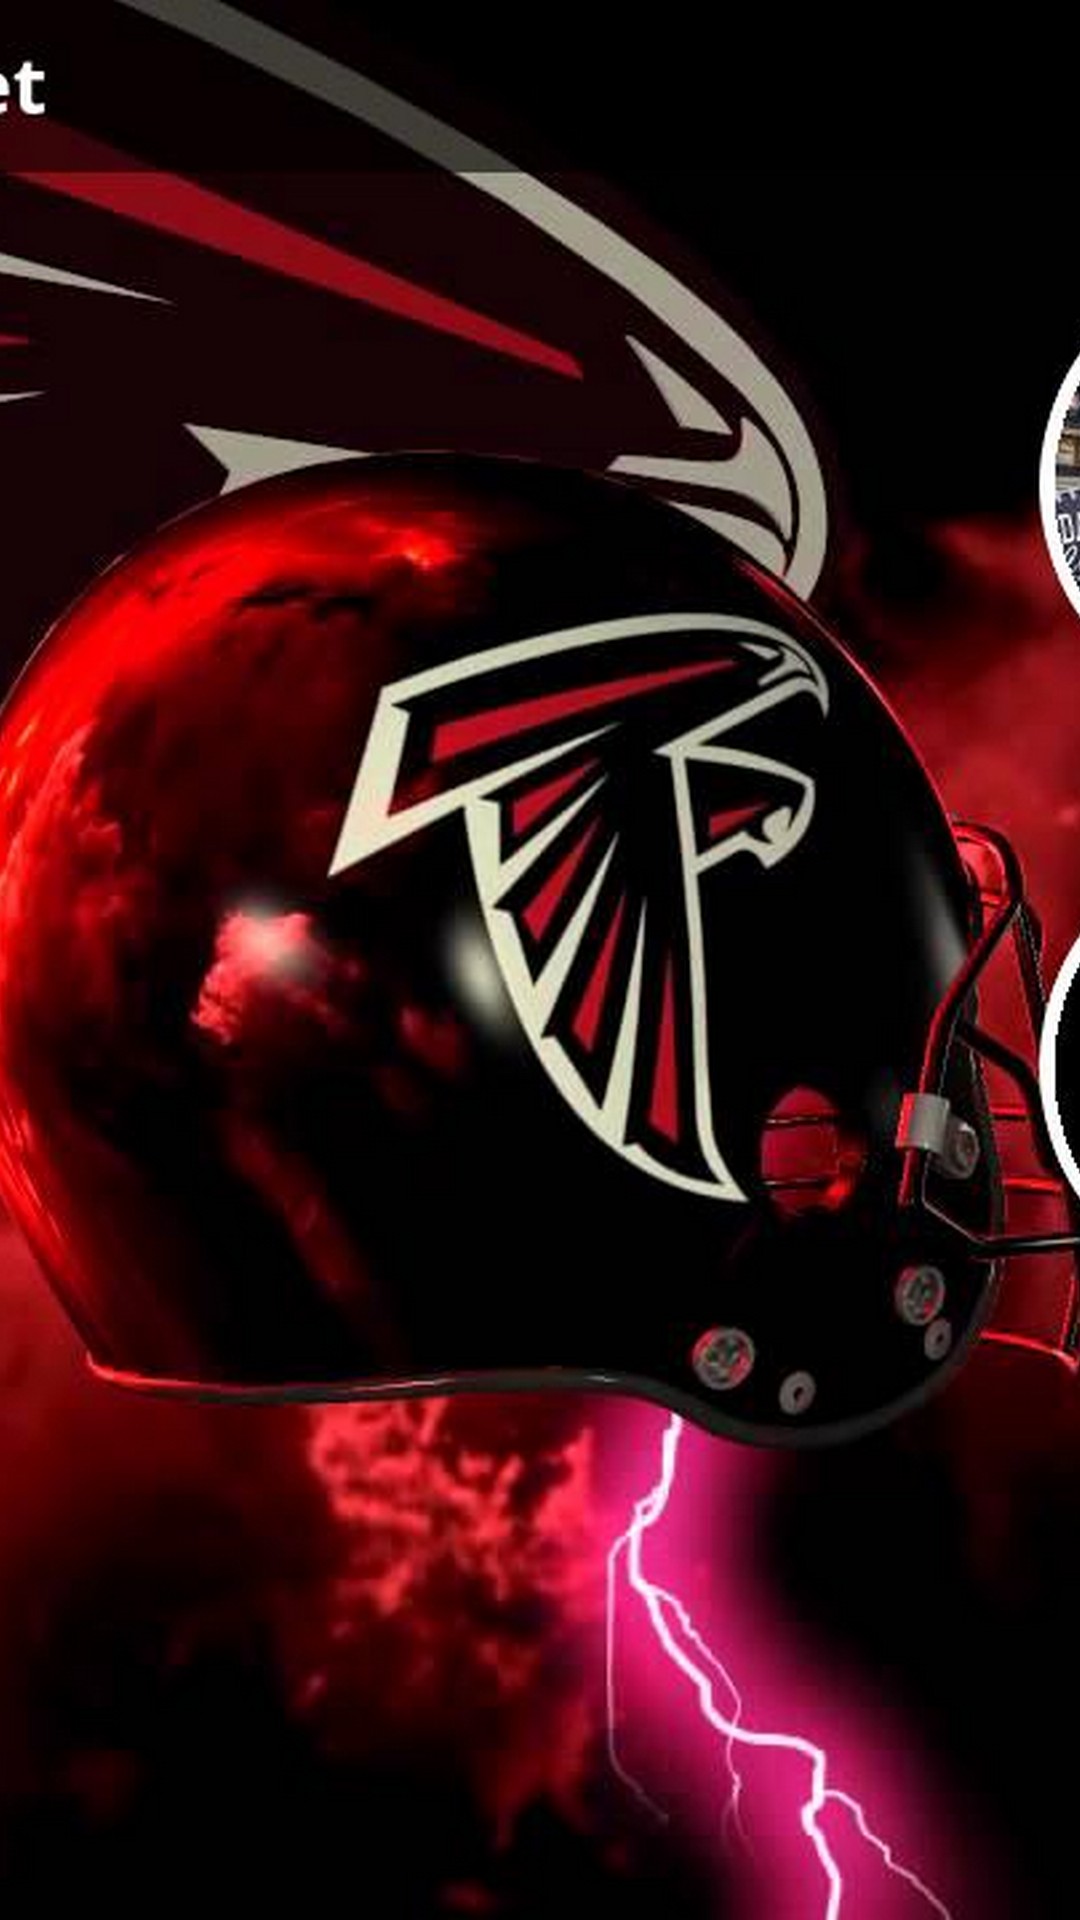 Atlanta Falcons iPhone 8 Plus Wallpaper with high-resolution 1080x1920 pixel. Download and set as wallpaper for Apple iPhone X, XS Max, XR, 8, 7, 6, SE, iPad, Android